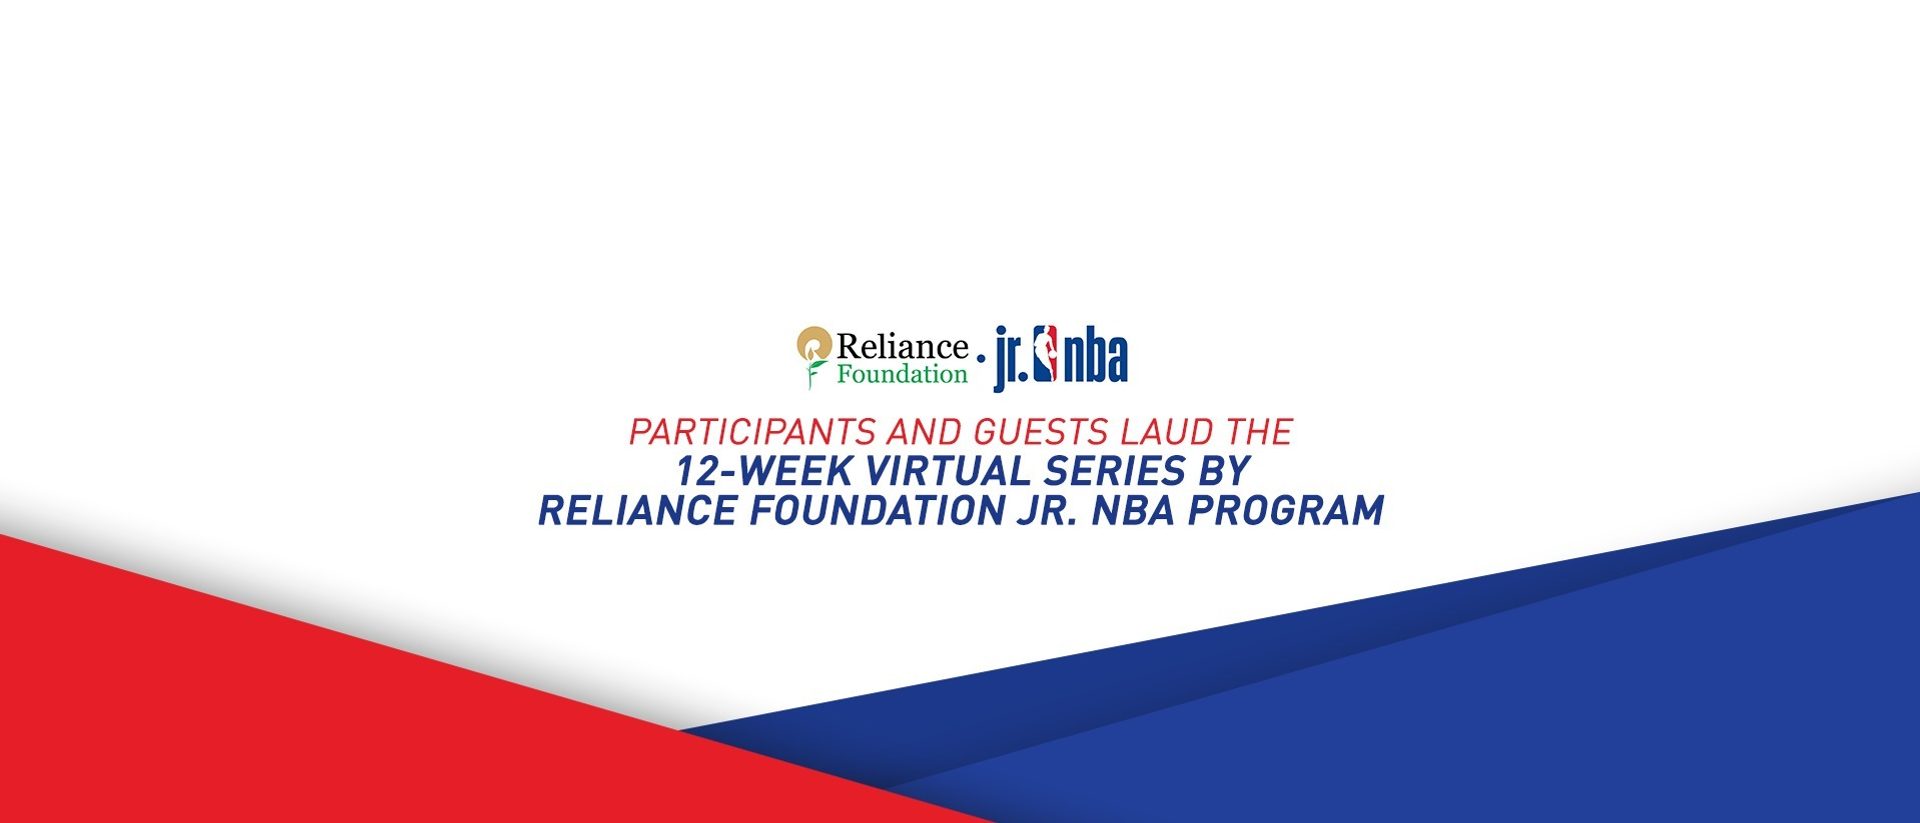 Read what the participants have to say about the 12-week series by Reliance Foundation Jr. NBA Program